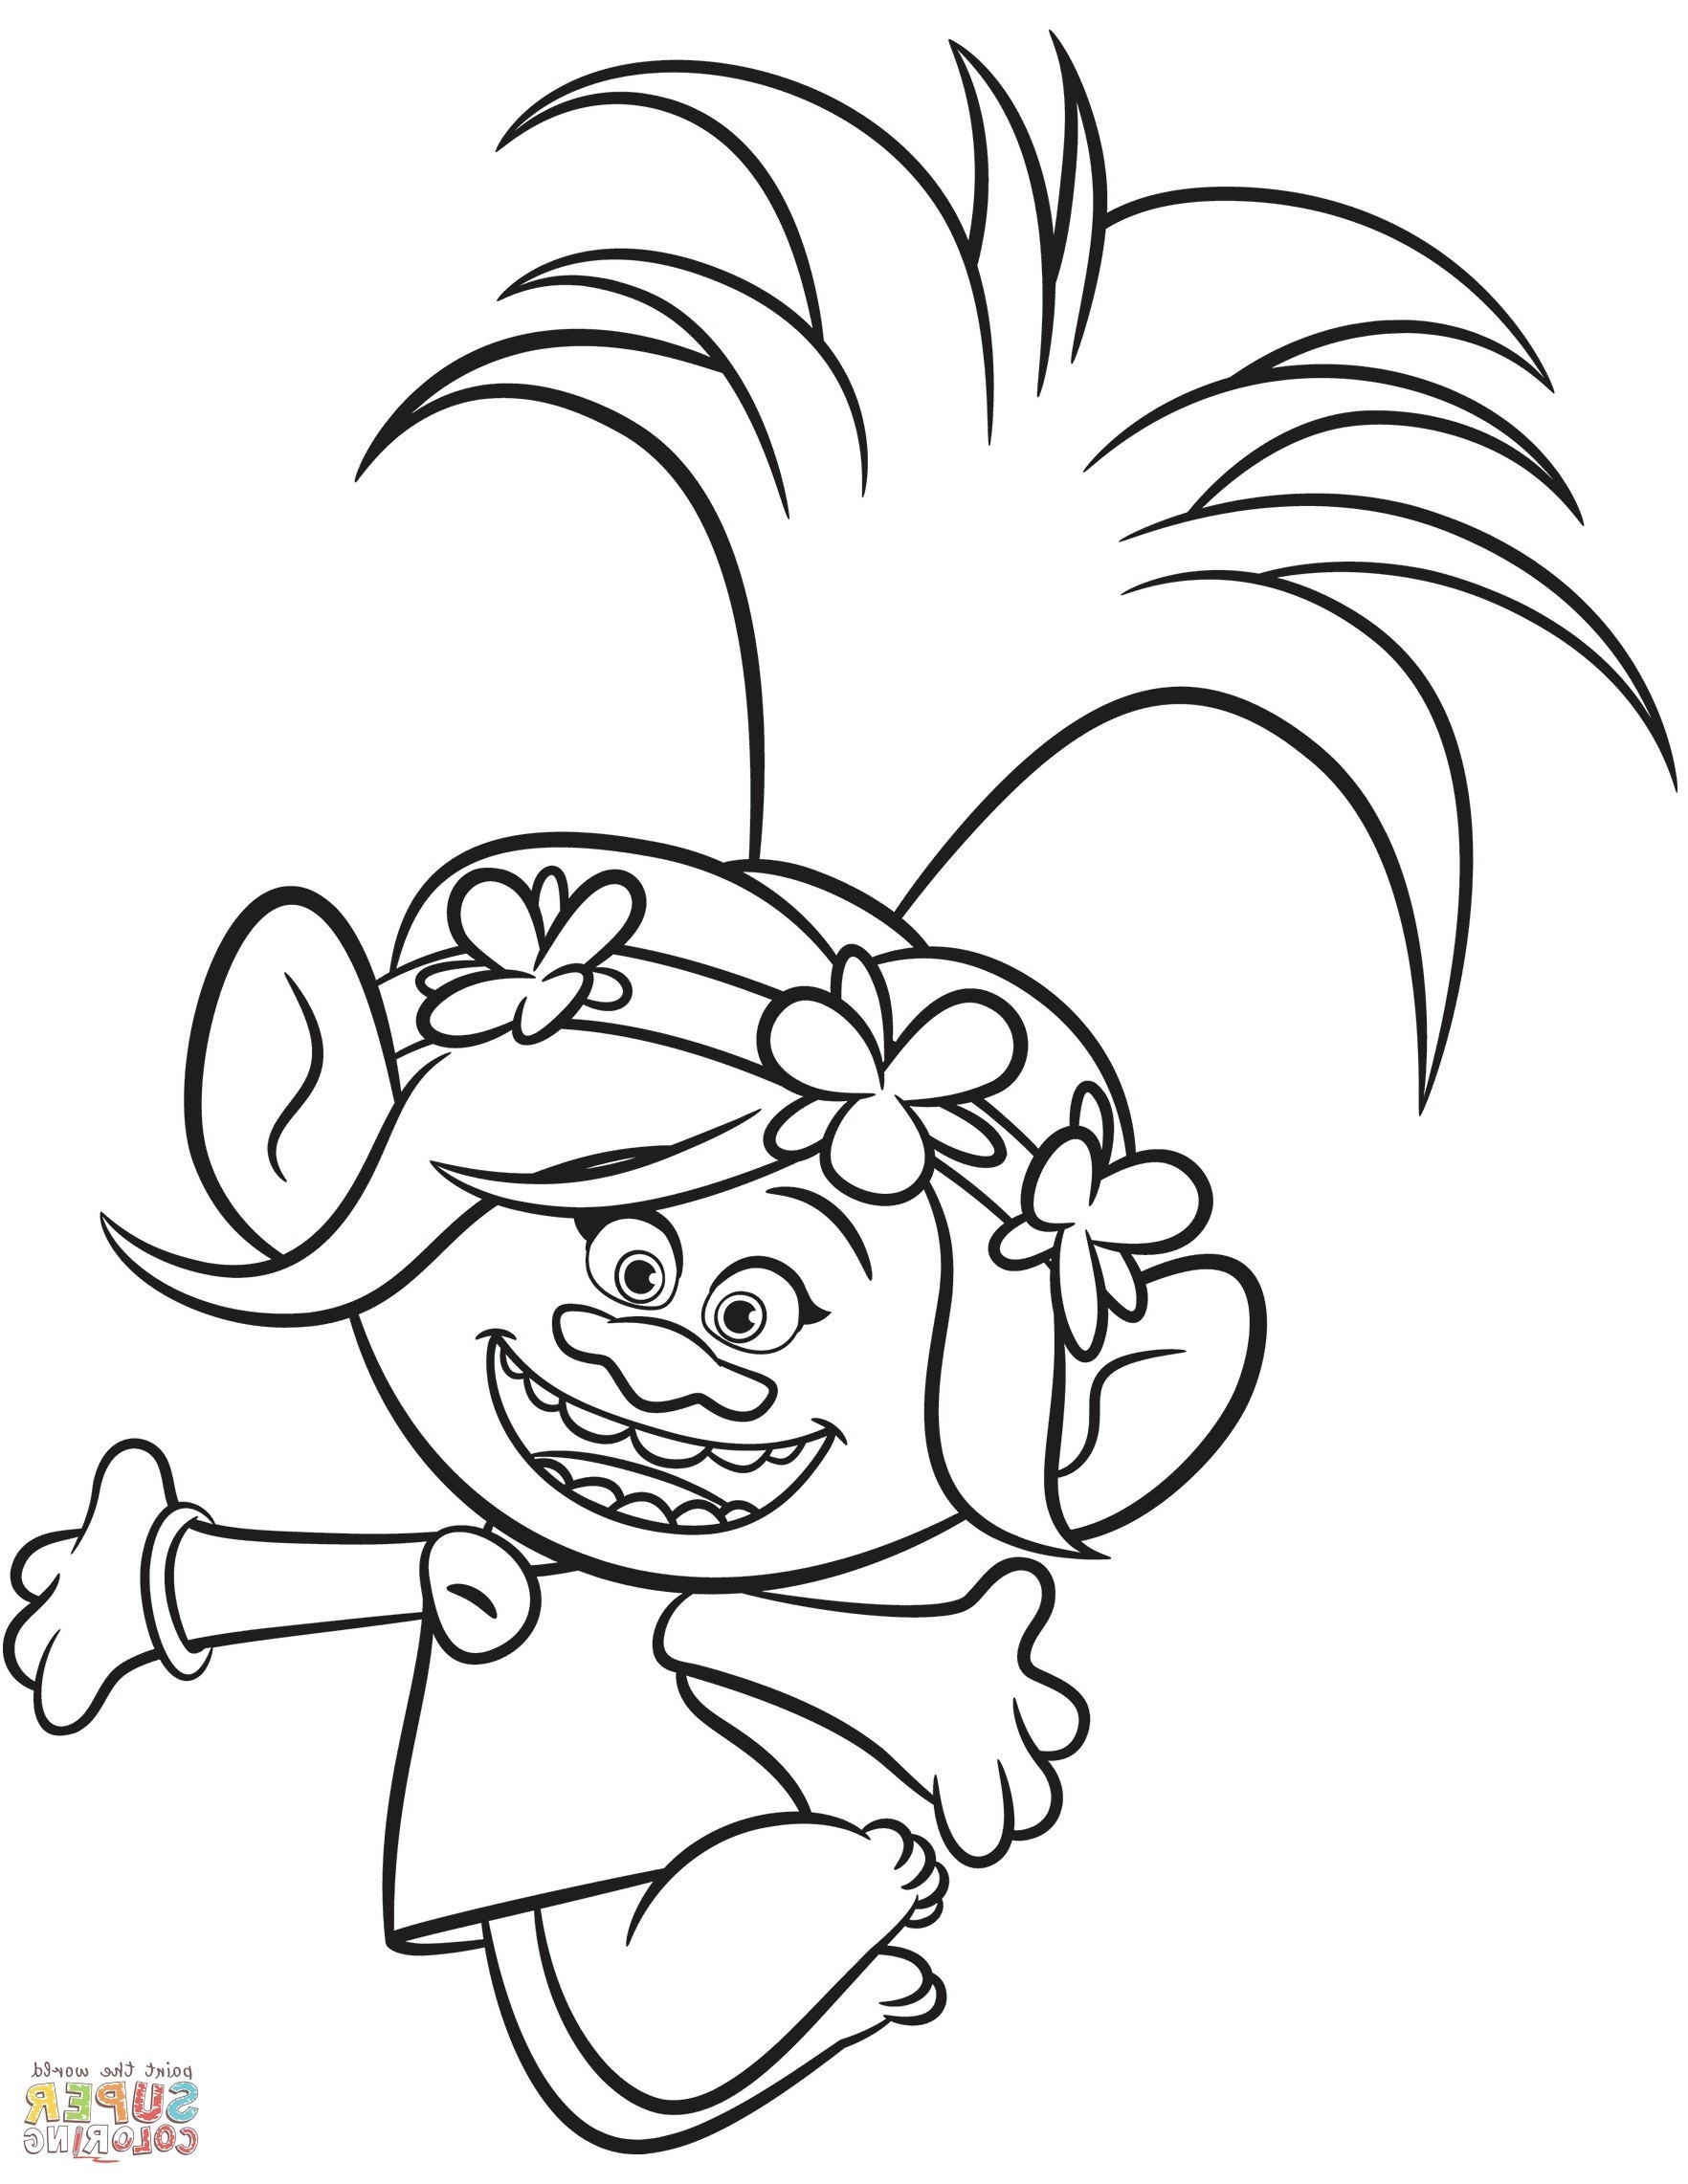 Printable Coloring Pages Of The Trolls thetunit